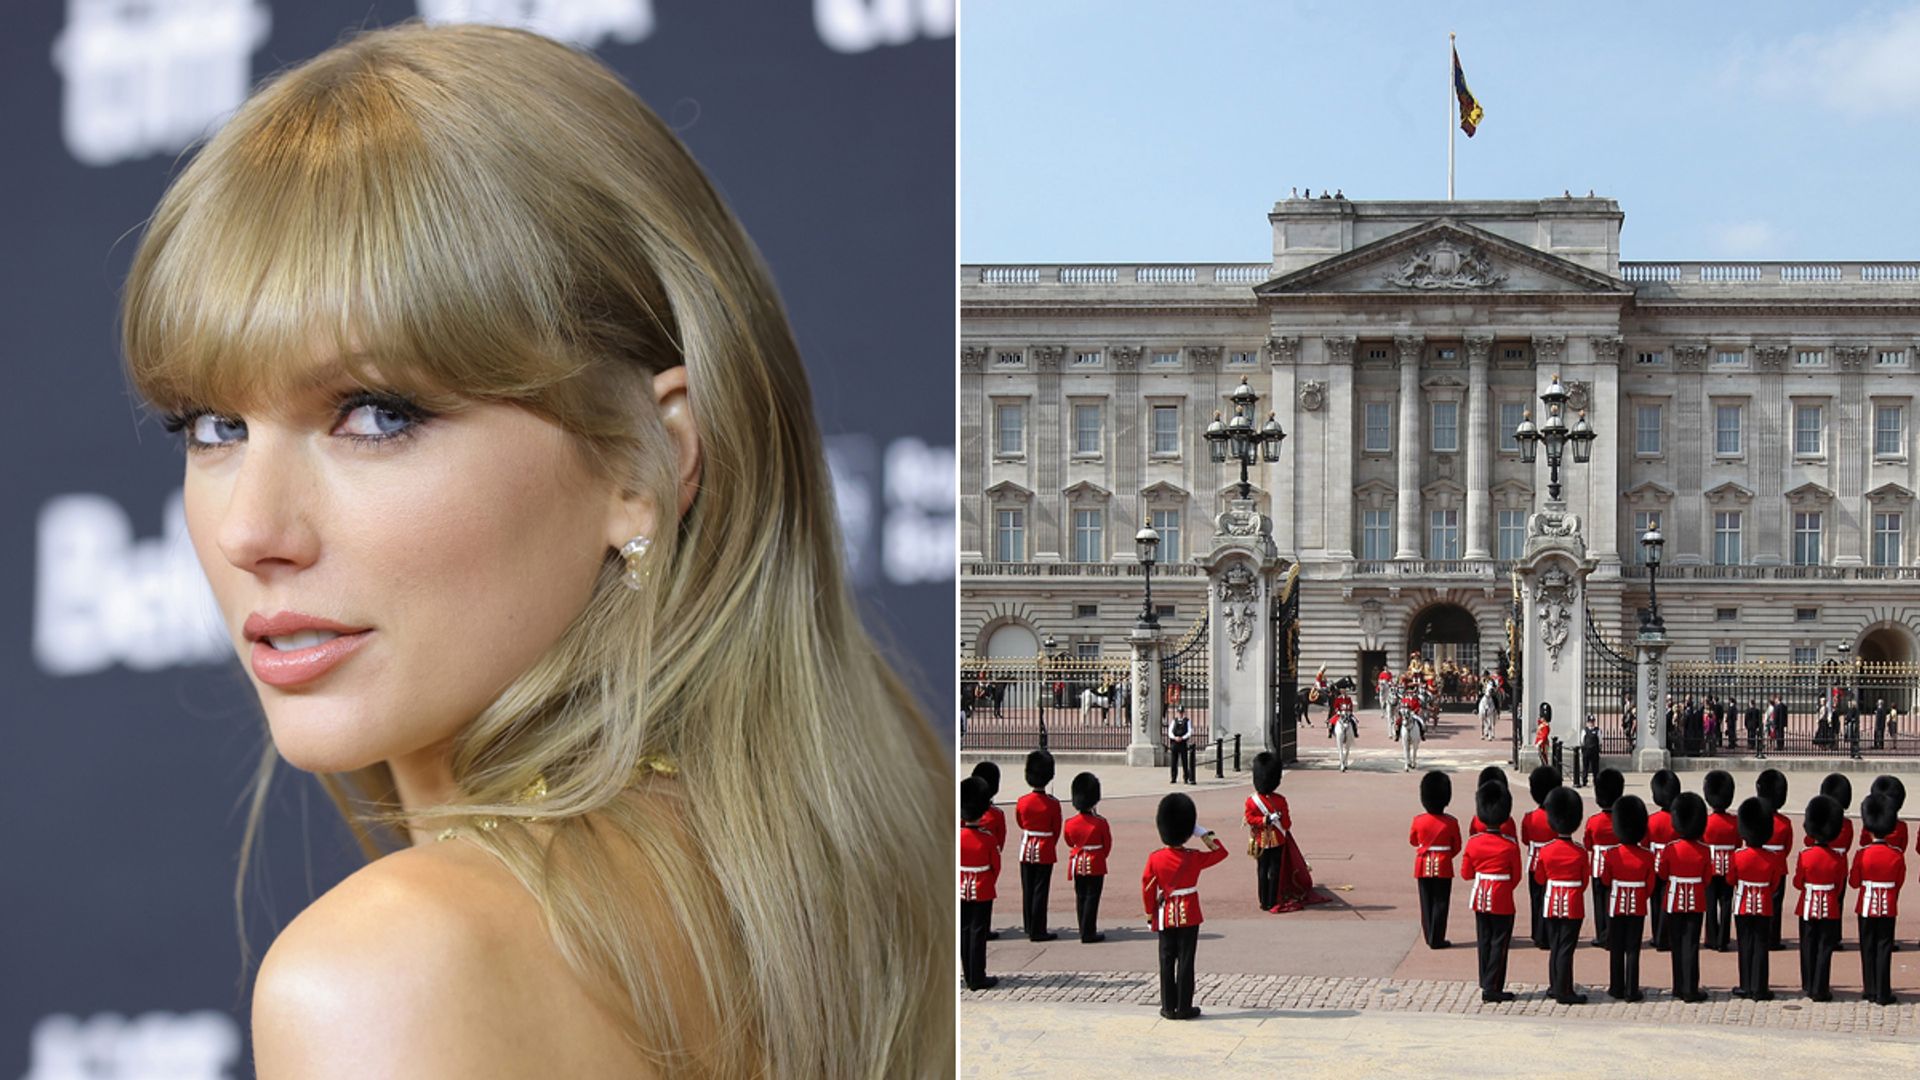 A split image of Taylor Swift and Buckingham Palace